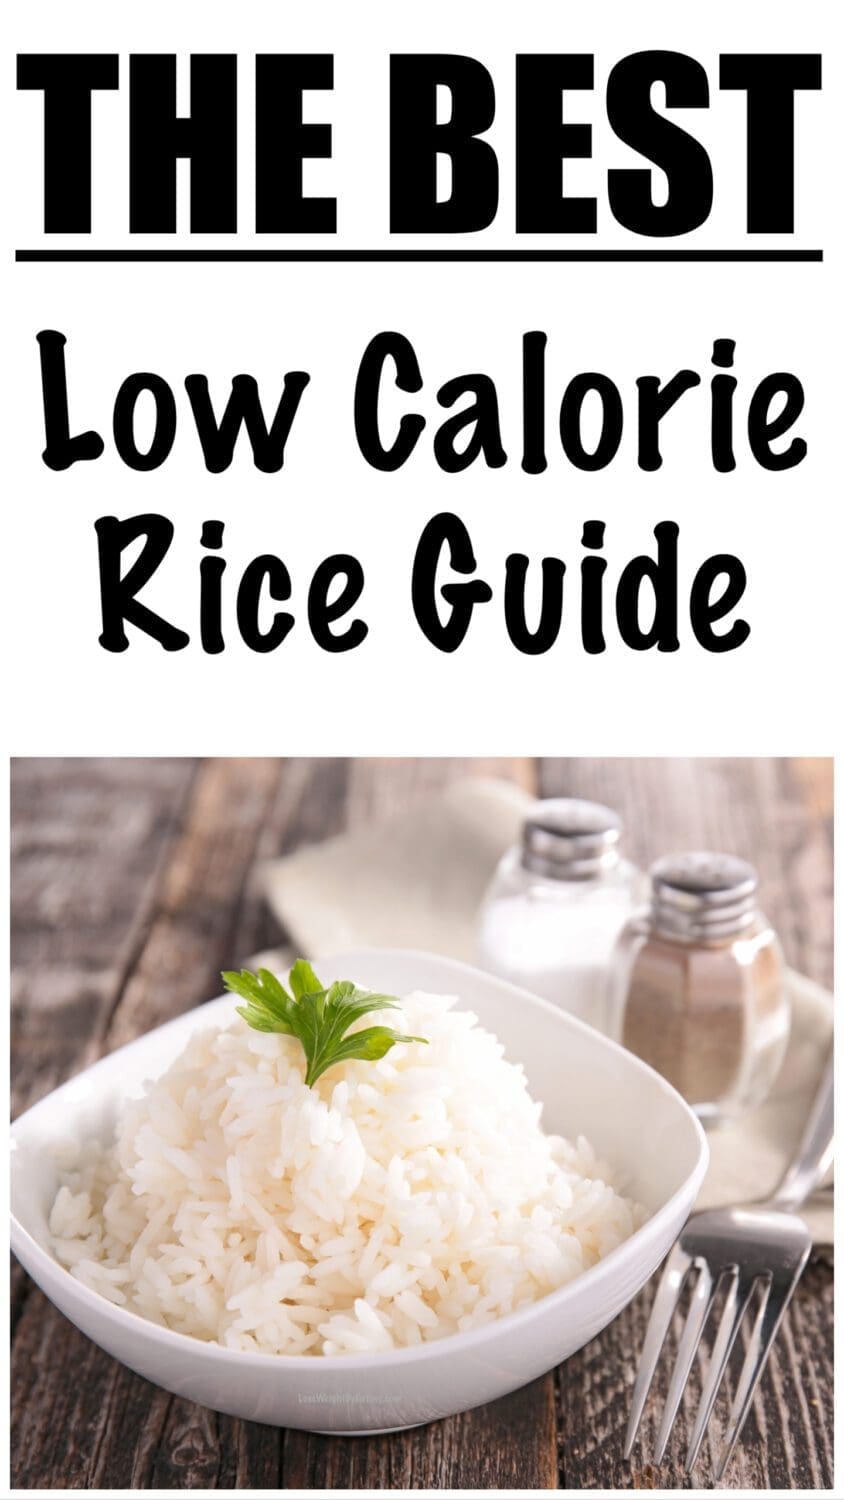 Calories in 1 Cup of Cooked Rice